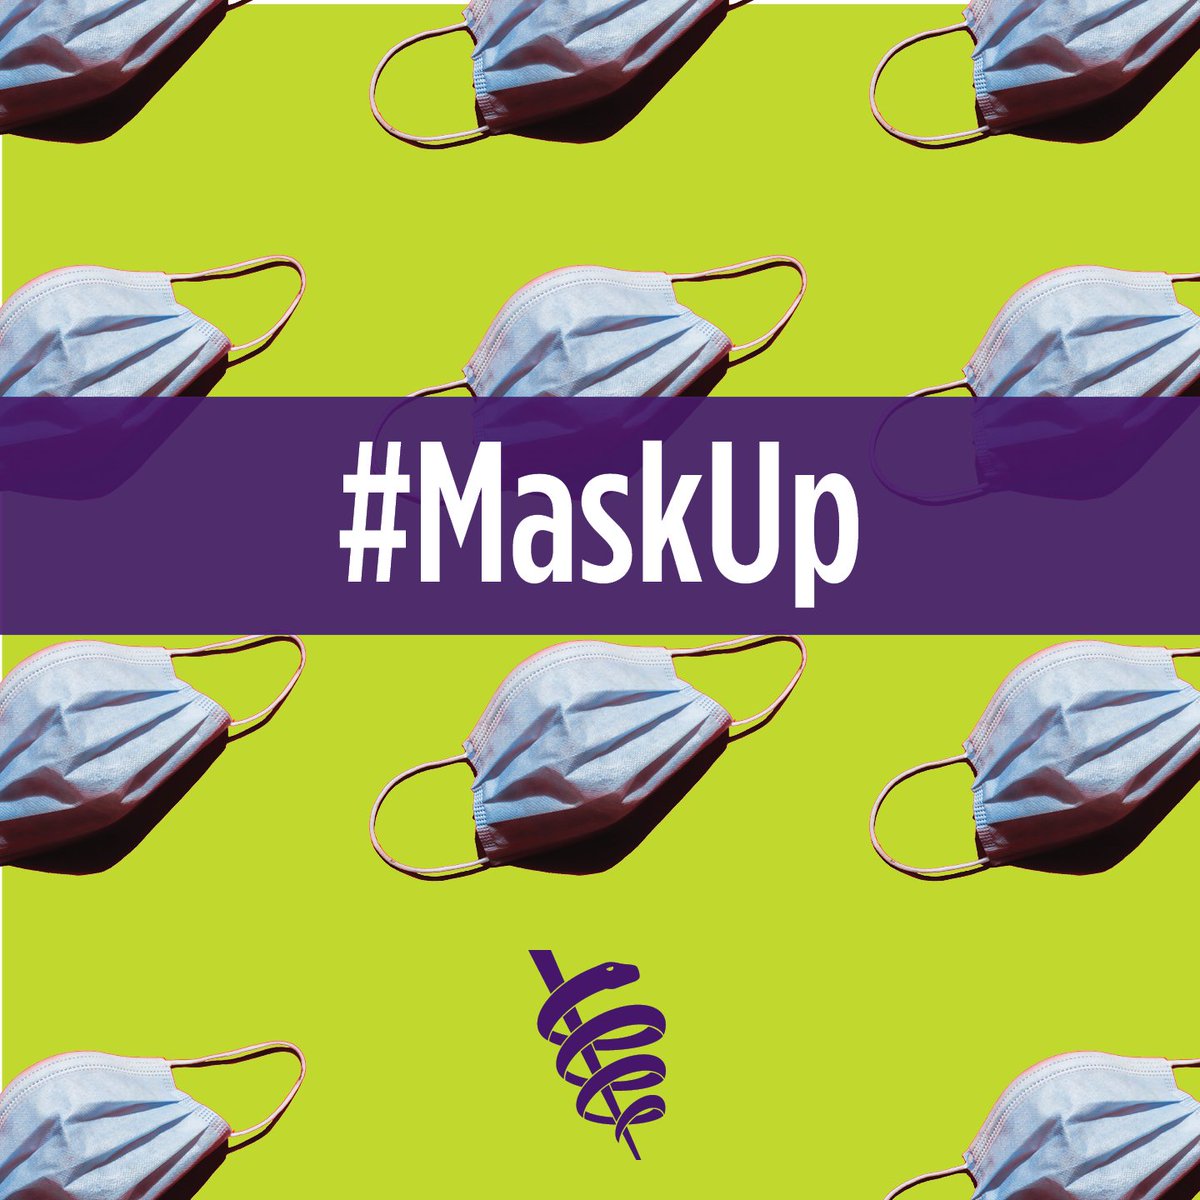 Now that NYC is urging people to wear mask again it is time elsewhere follows. Mask work for more then covid. They help with Flu, RSV, Covid and all respiratory viruses that area airborne. #BringBackMask ow.ly/nH9W30ssTz2